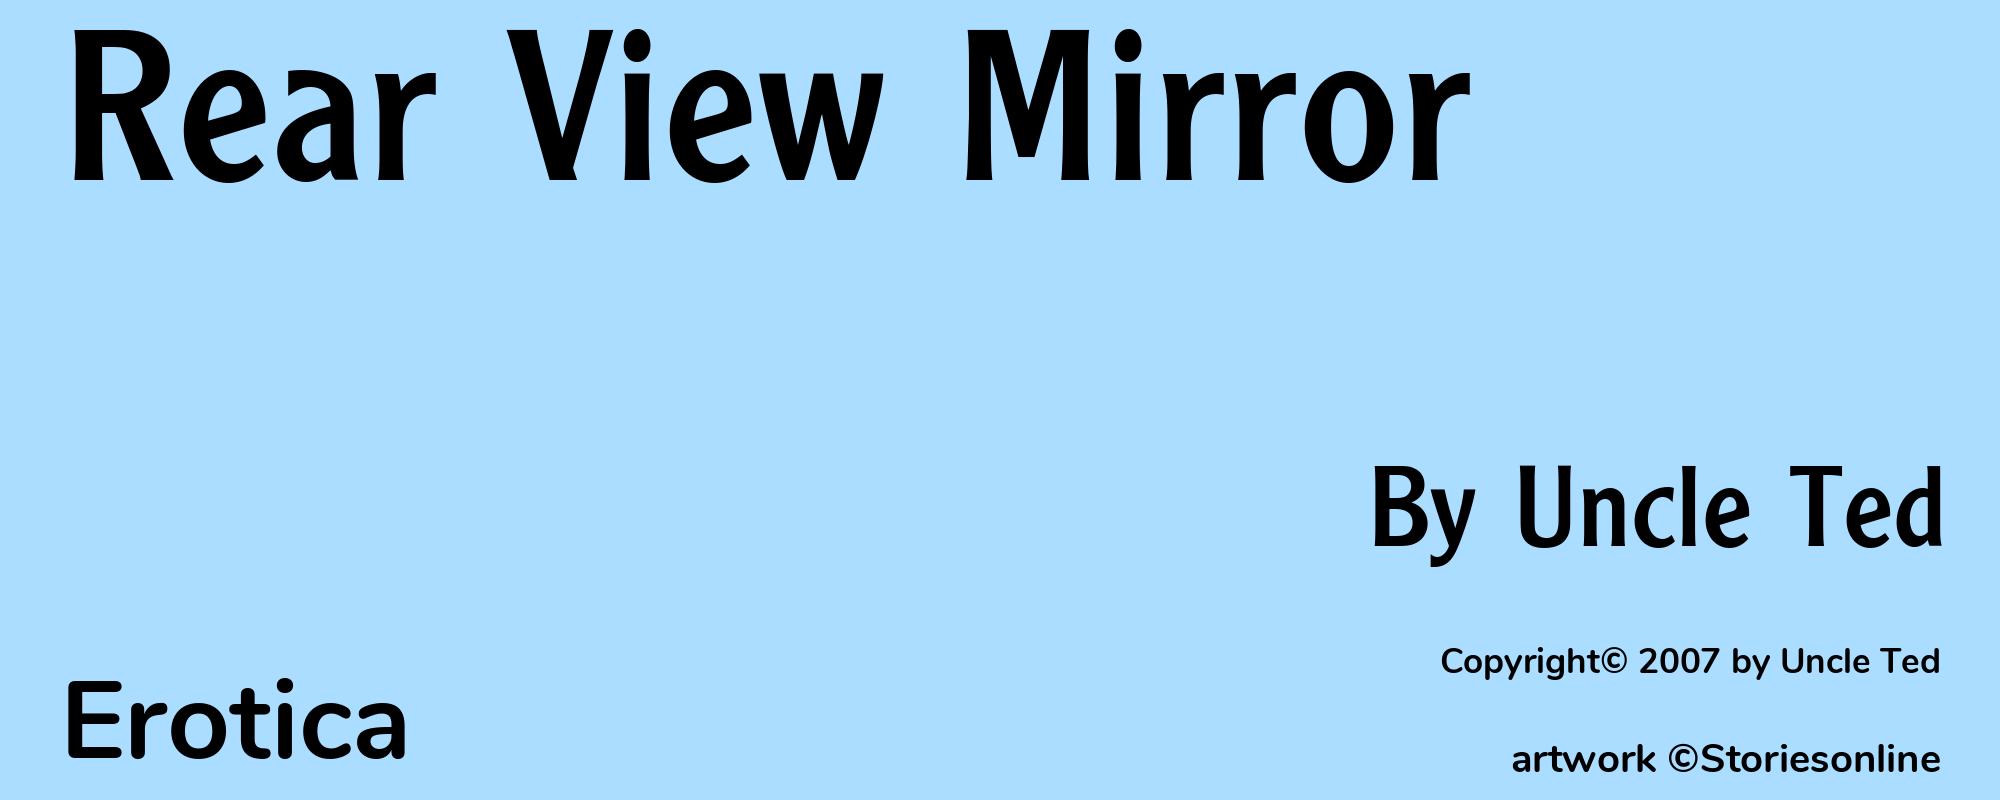 Rear View Mirror - Cover